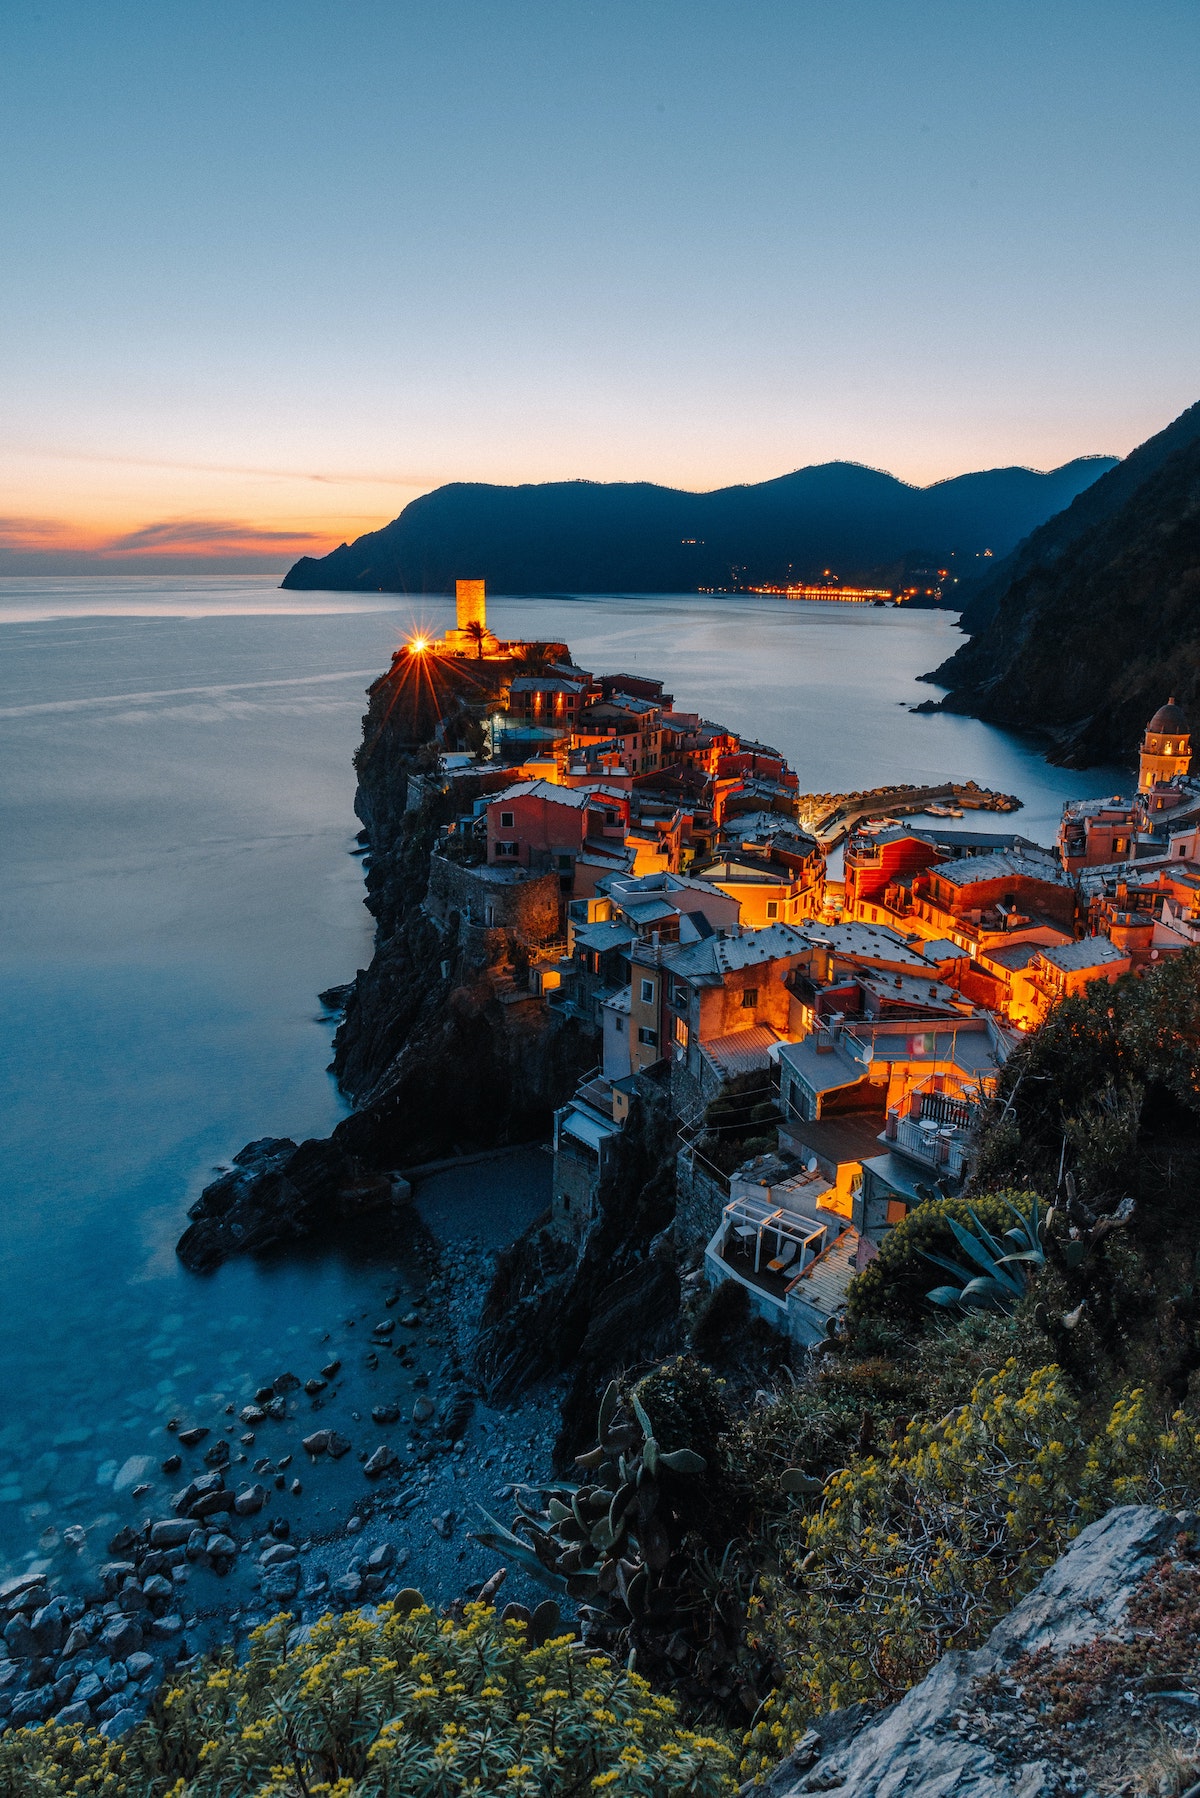 vernazza at sunset